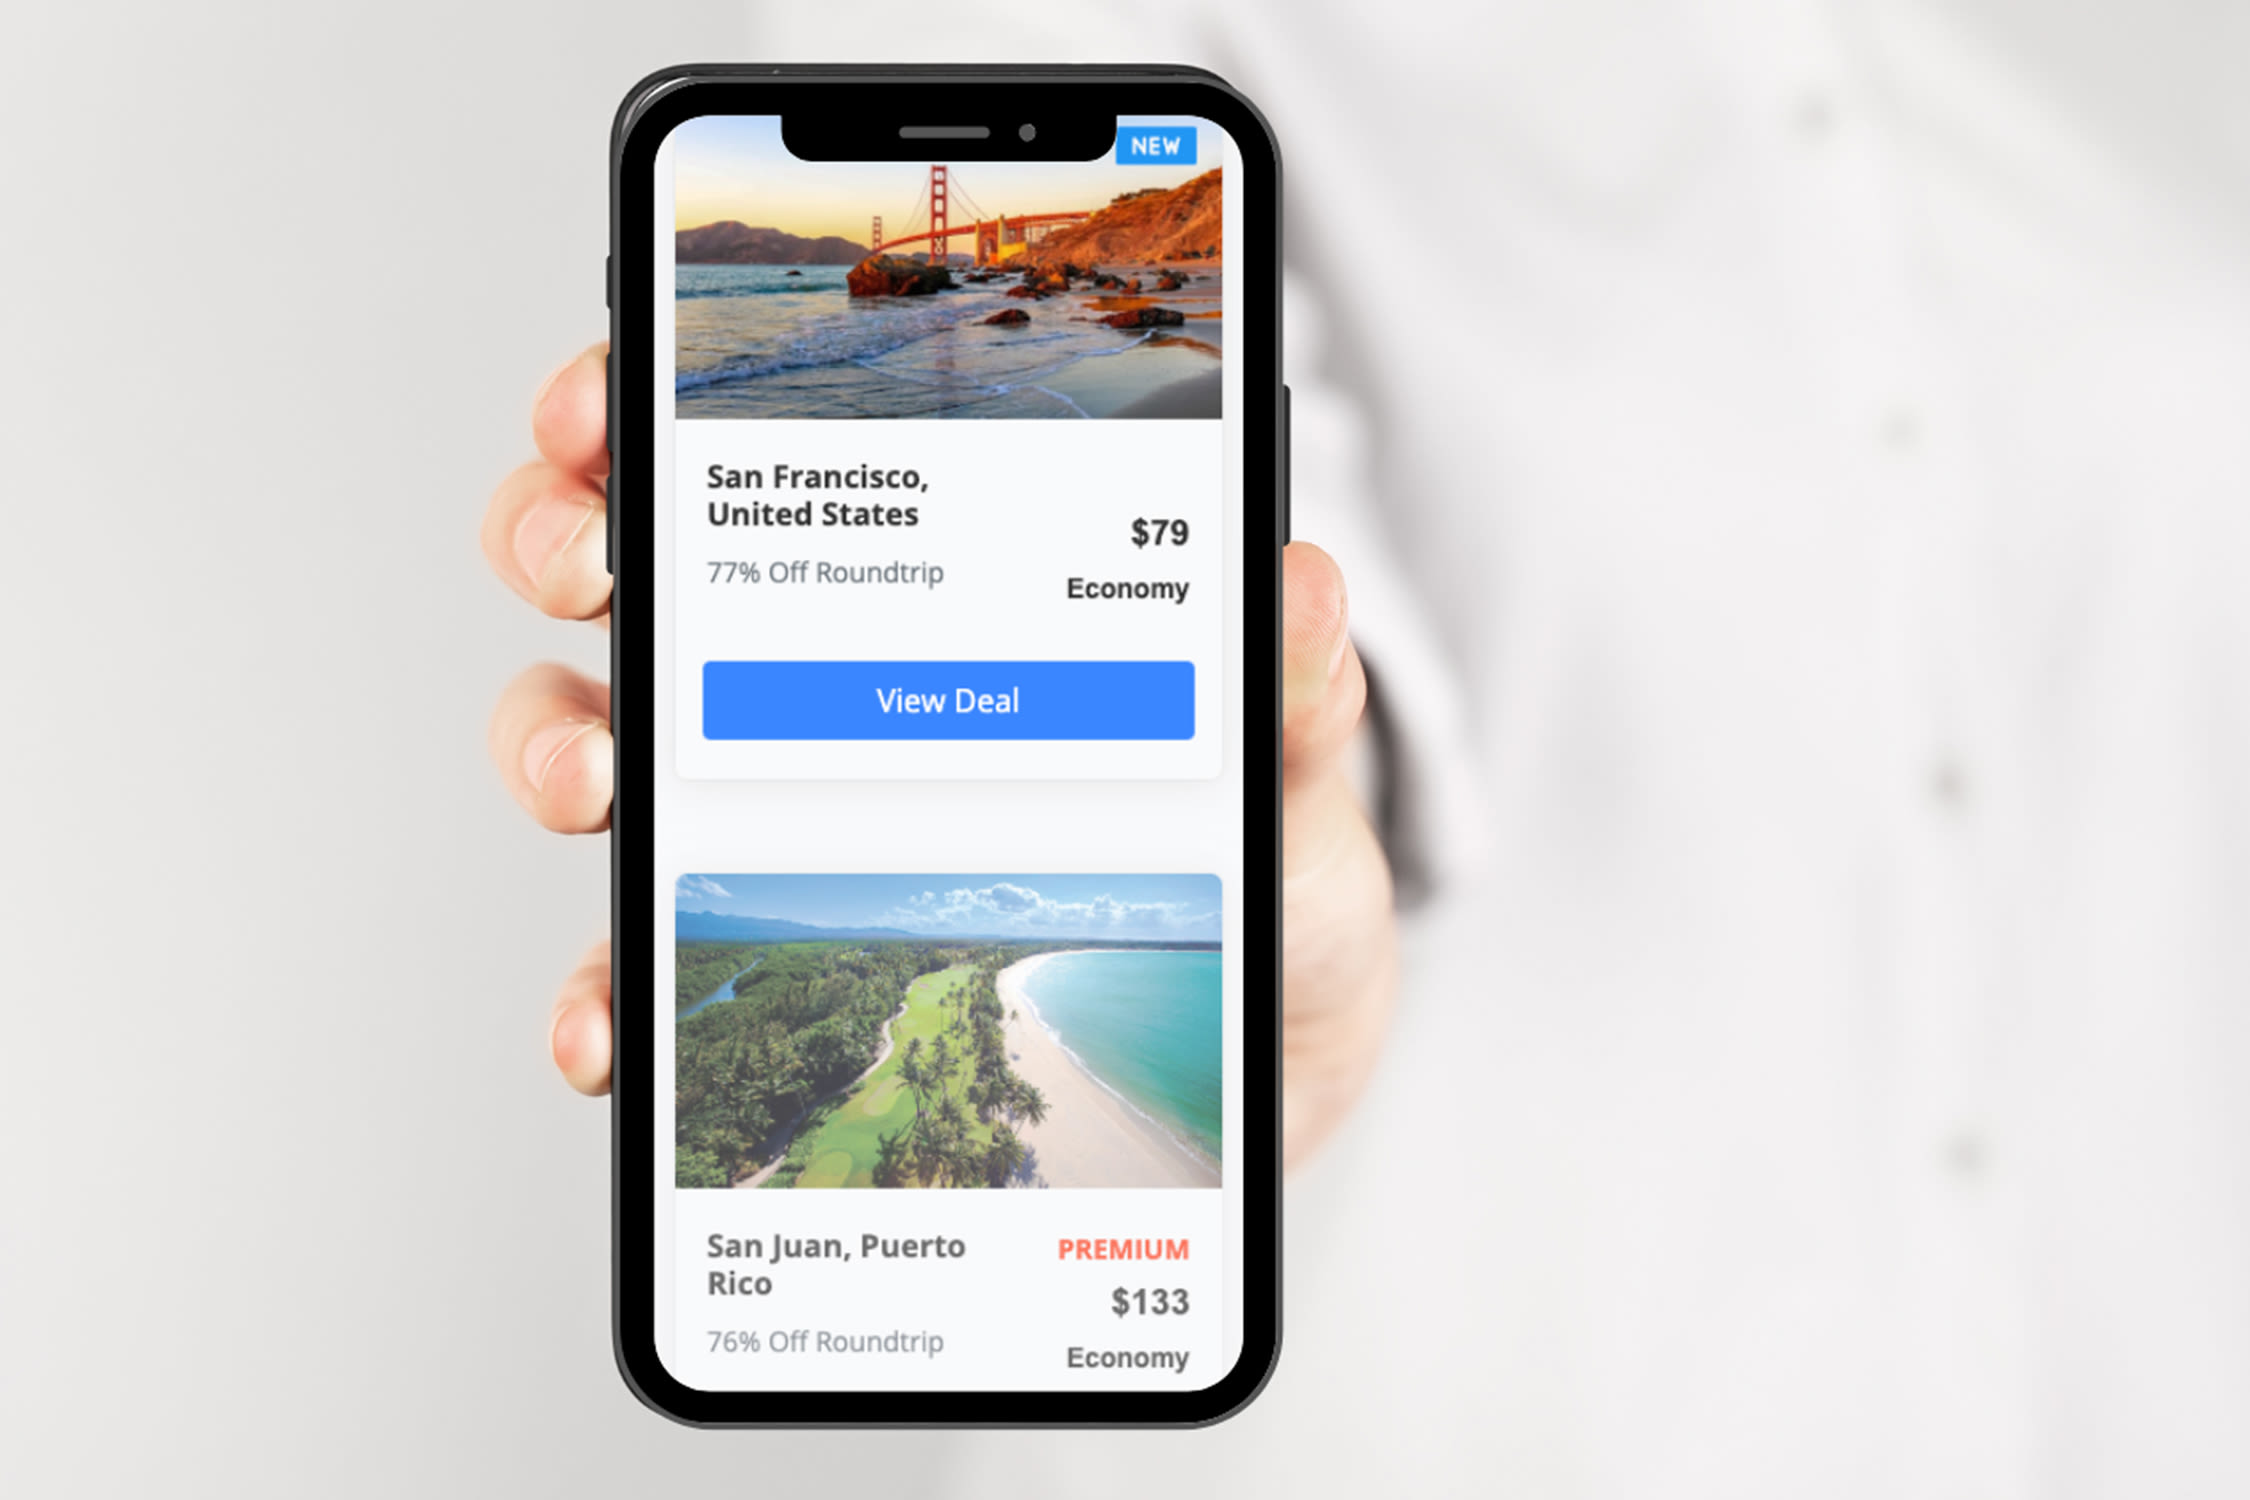 This flight deal alert service can help you see the world at a low cost